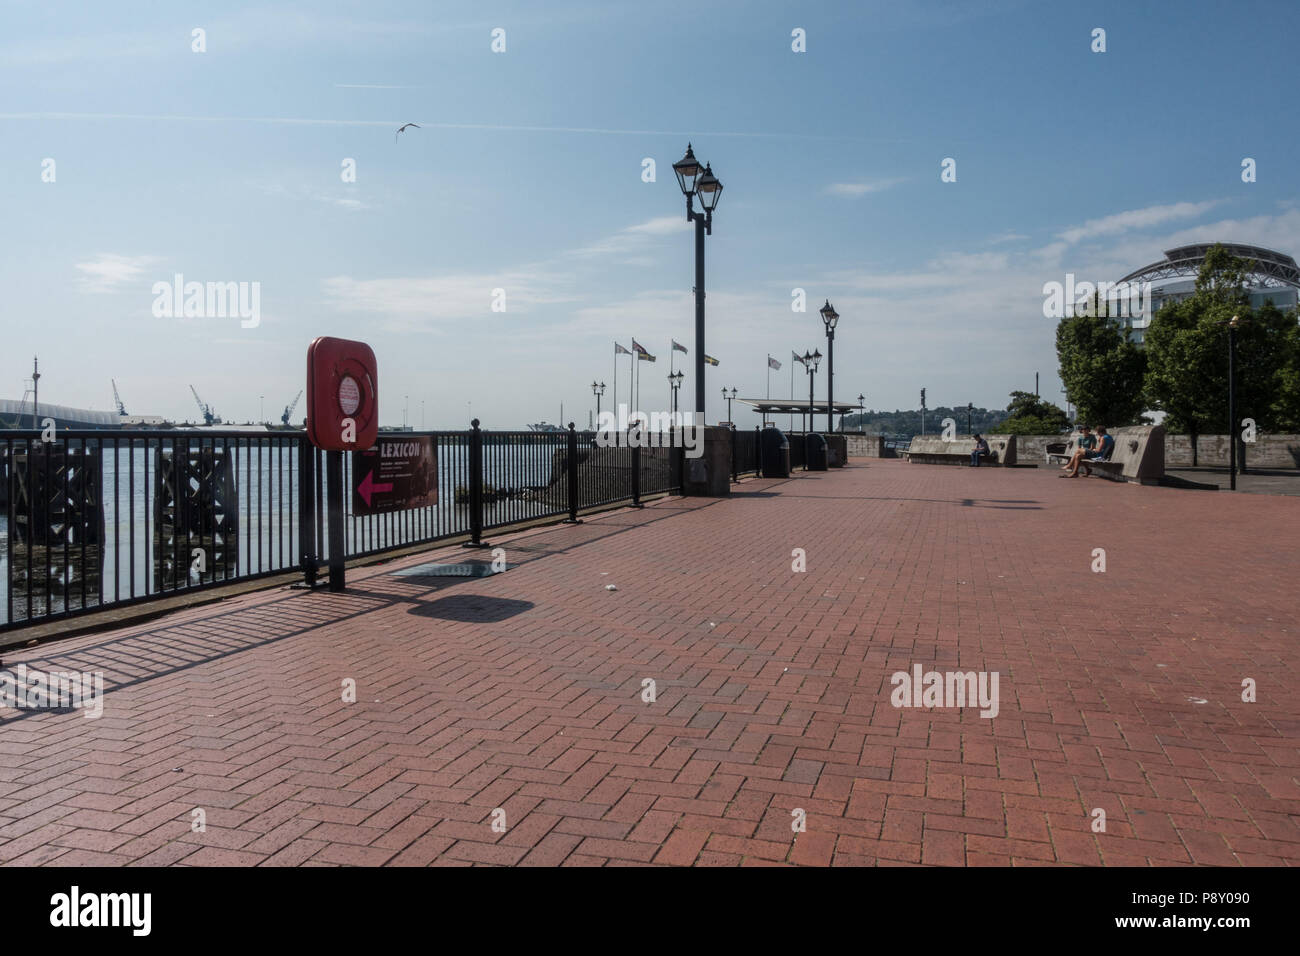 The sun shinning on a hot summers day at Mermaid Quay in Cardiff, Wales UK Stock Photo